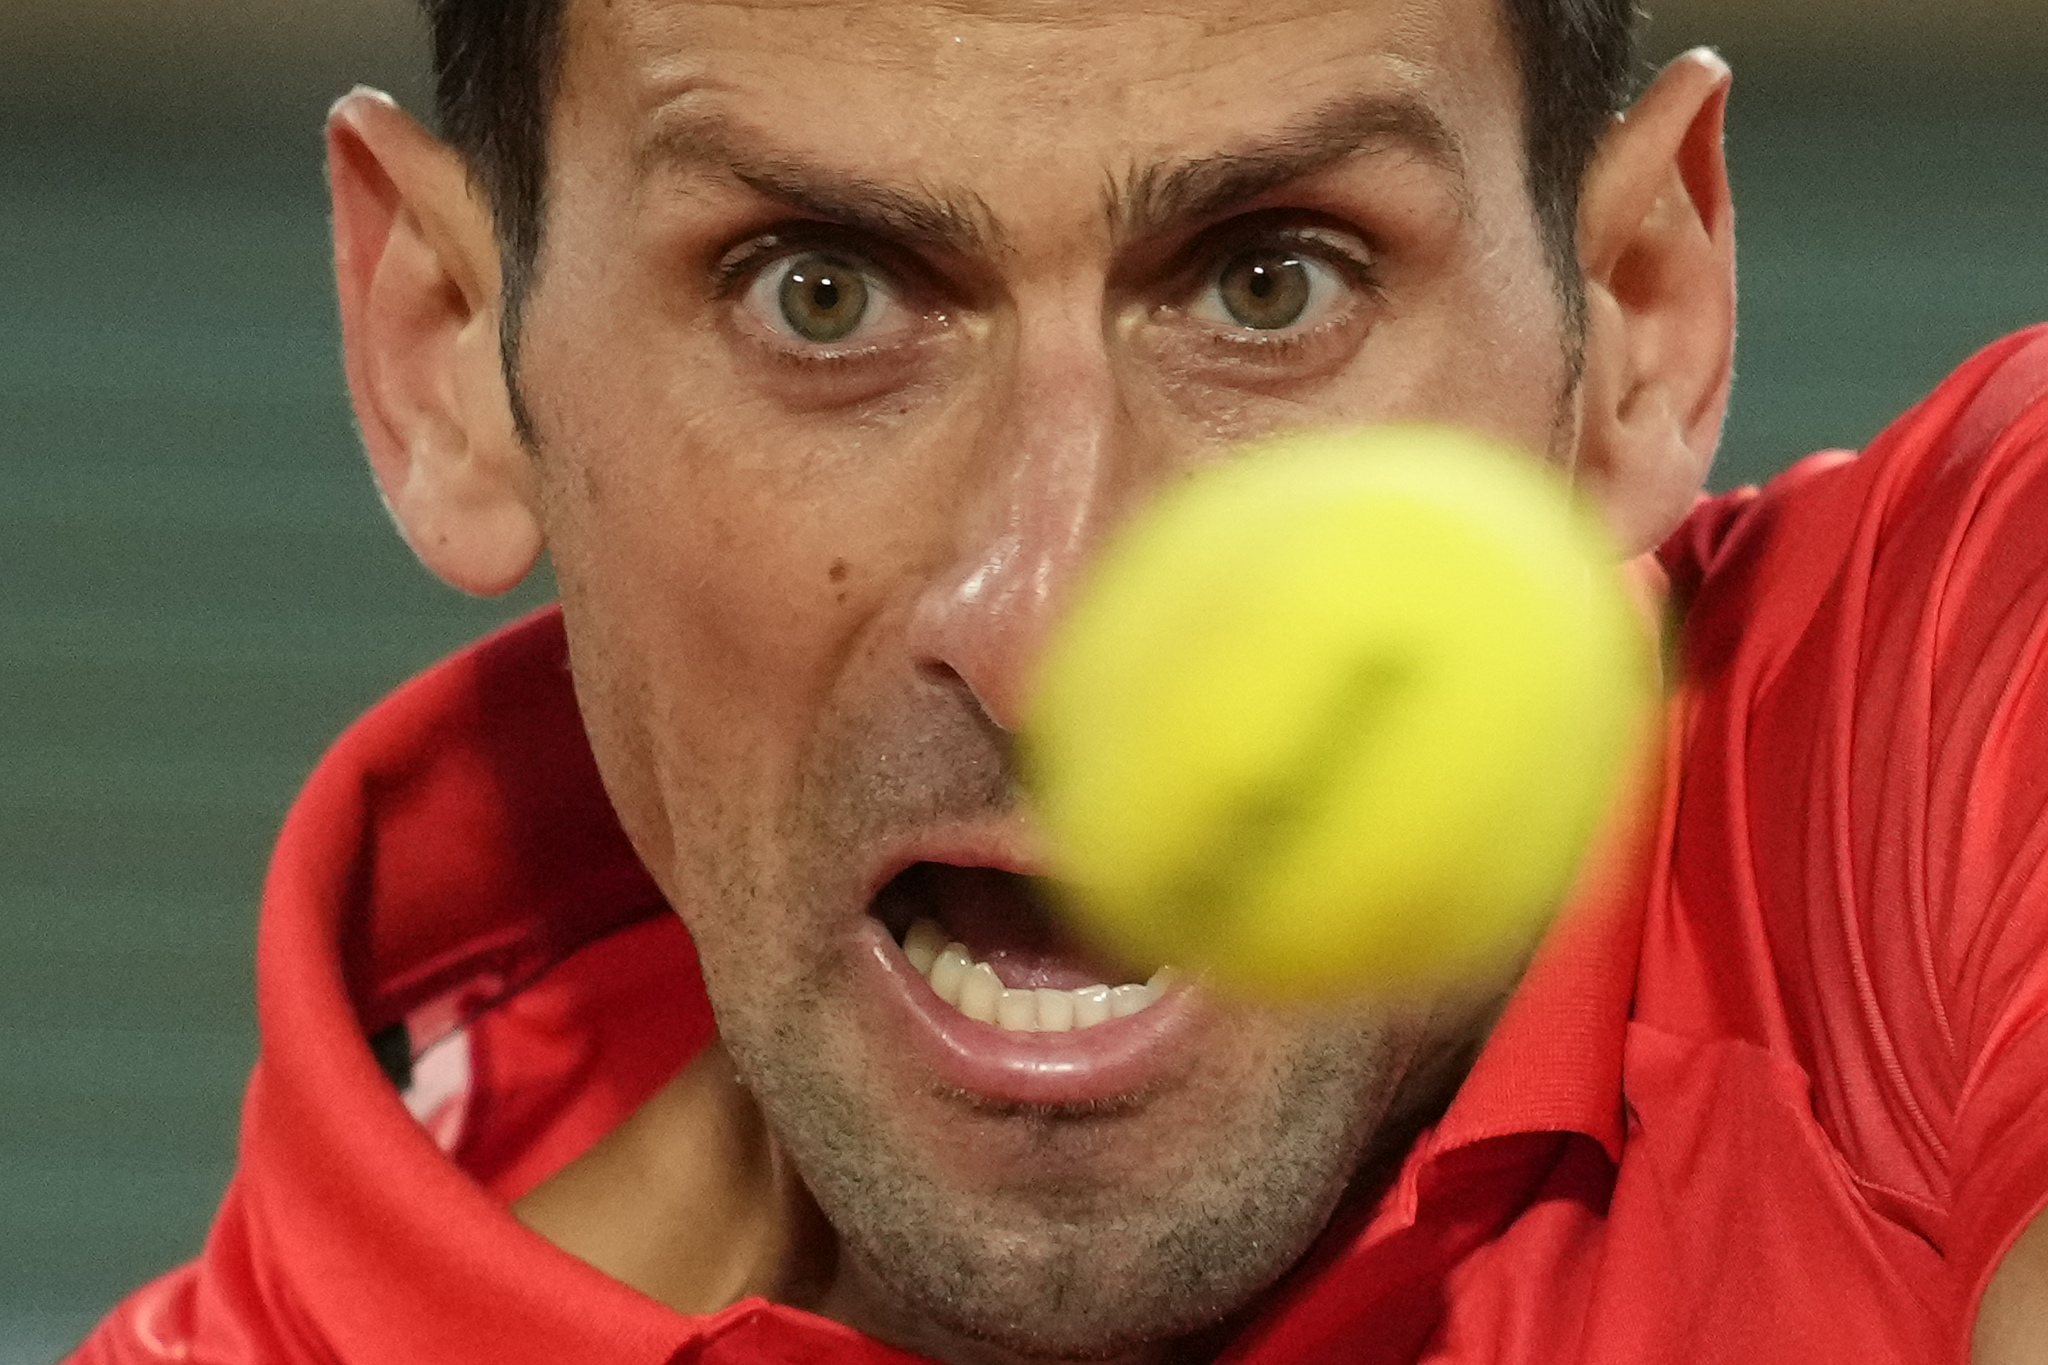 Serbia's Novak  lt;HIT gt;Djokovic lt;/HIT gt; plays a shot against Spain's Rafael  lt;HIT gt;Nadal lt;/HIT gt; during their quarterfinal match at the French Open tennis tournament in Roland Garros stadium in Paris, France, Tuesday, May 31, 2022. (AP Photo/Christophe Ena)